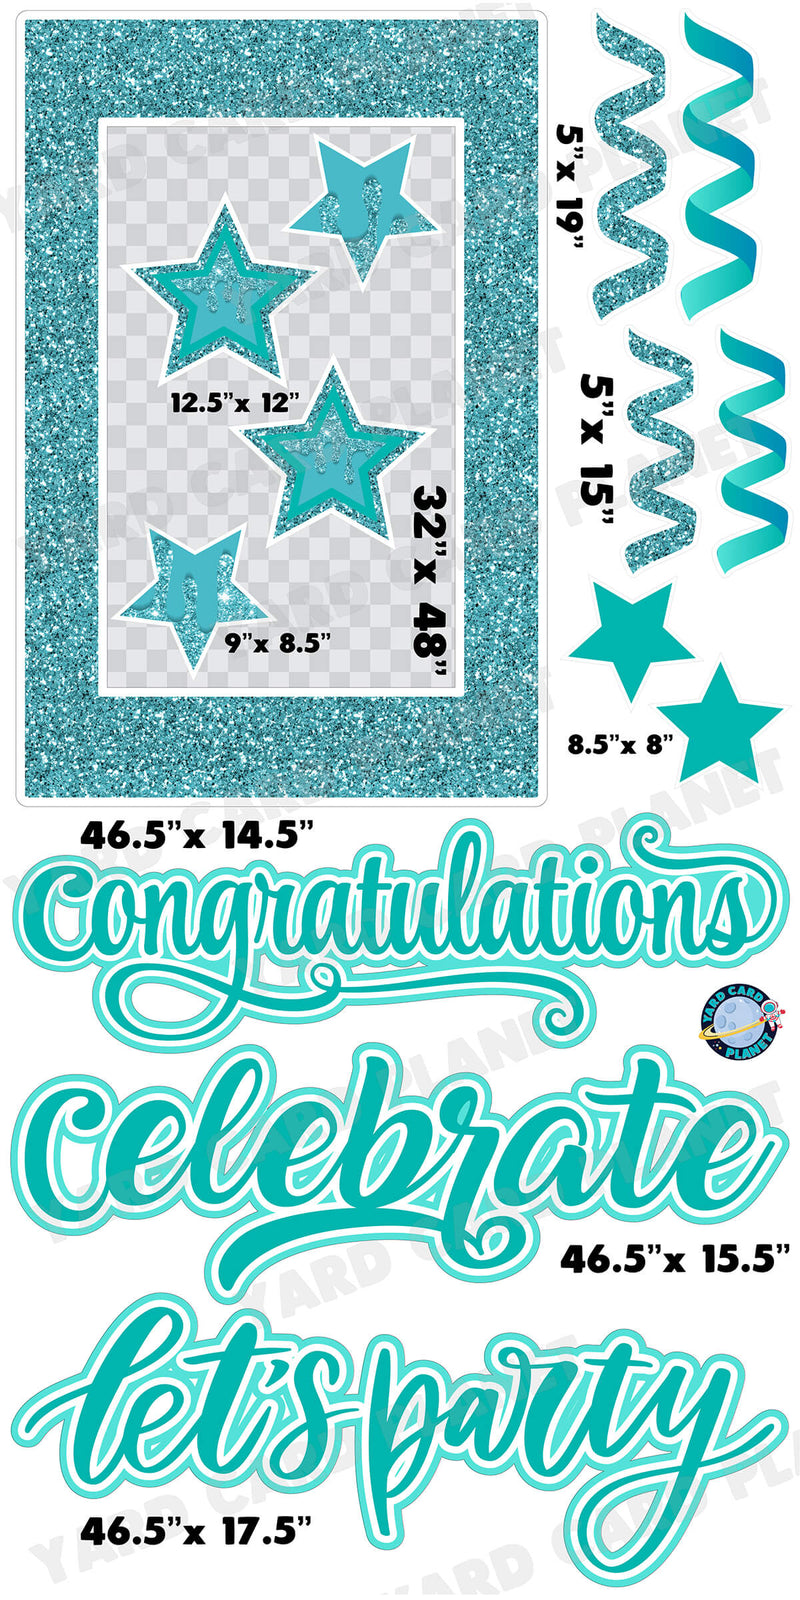 Teal Glitter Multi Purpose EZ Frame with Interchangeable Greetings and Matching Yard Card Flair Set